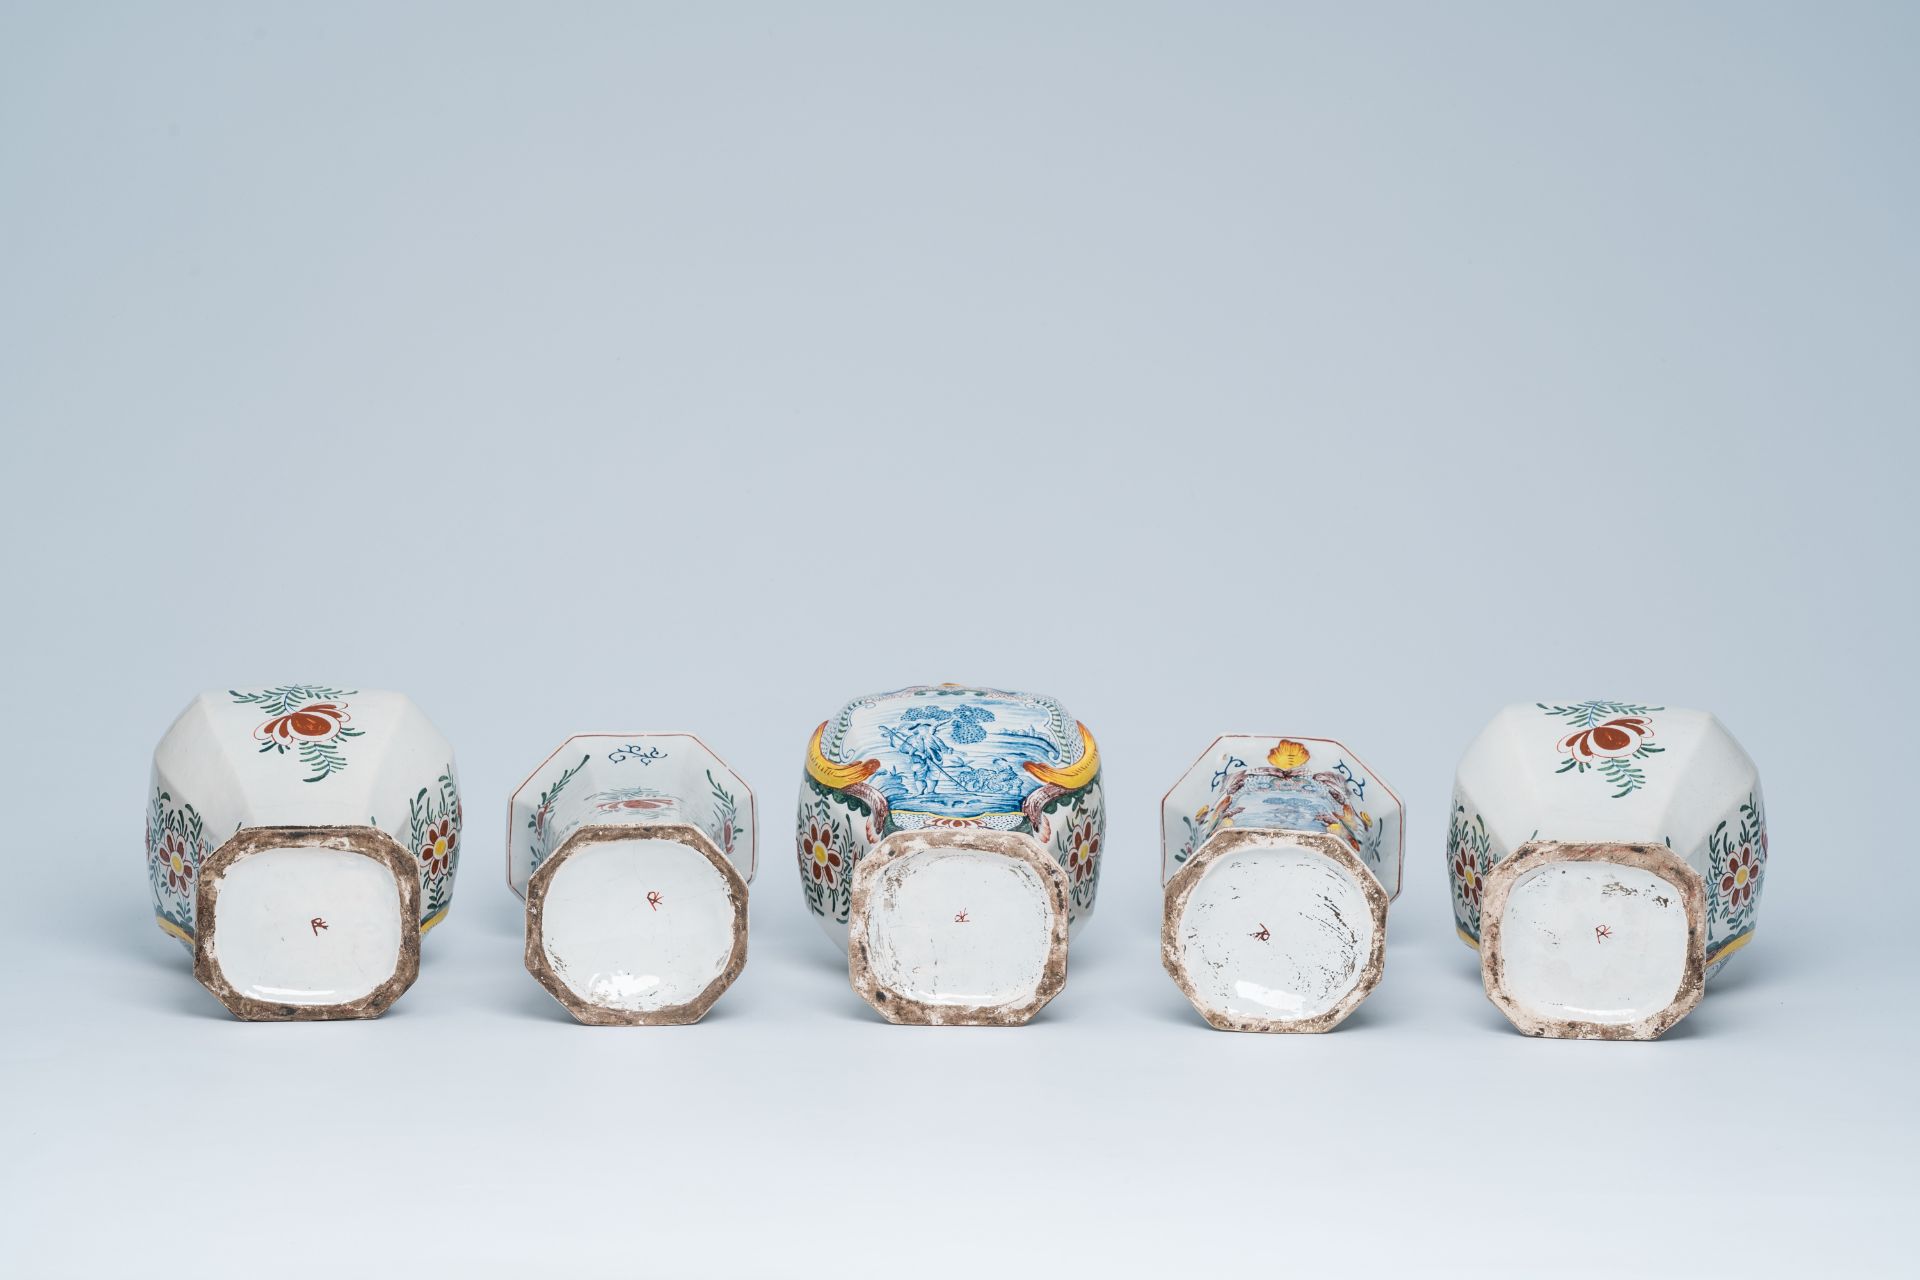 A Dutch Delft polychrome five-piece vase garniture with animated scenes, 19th C. - Image 6 of 7